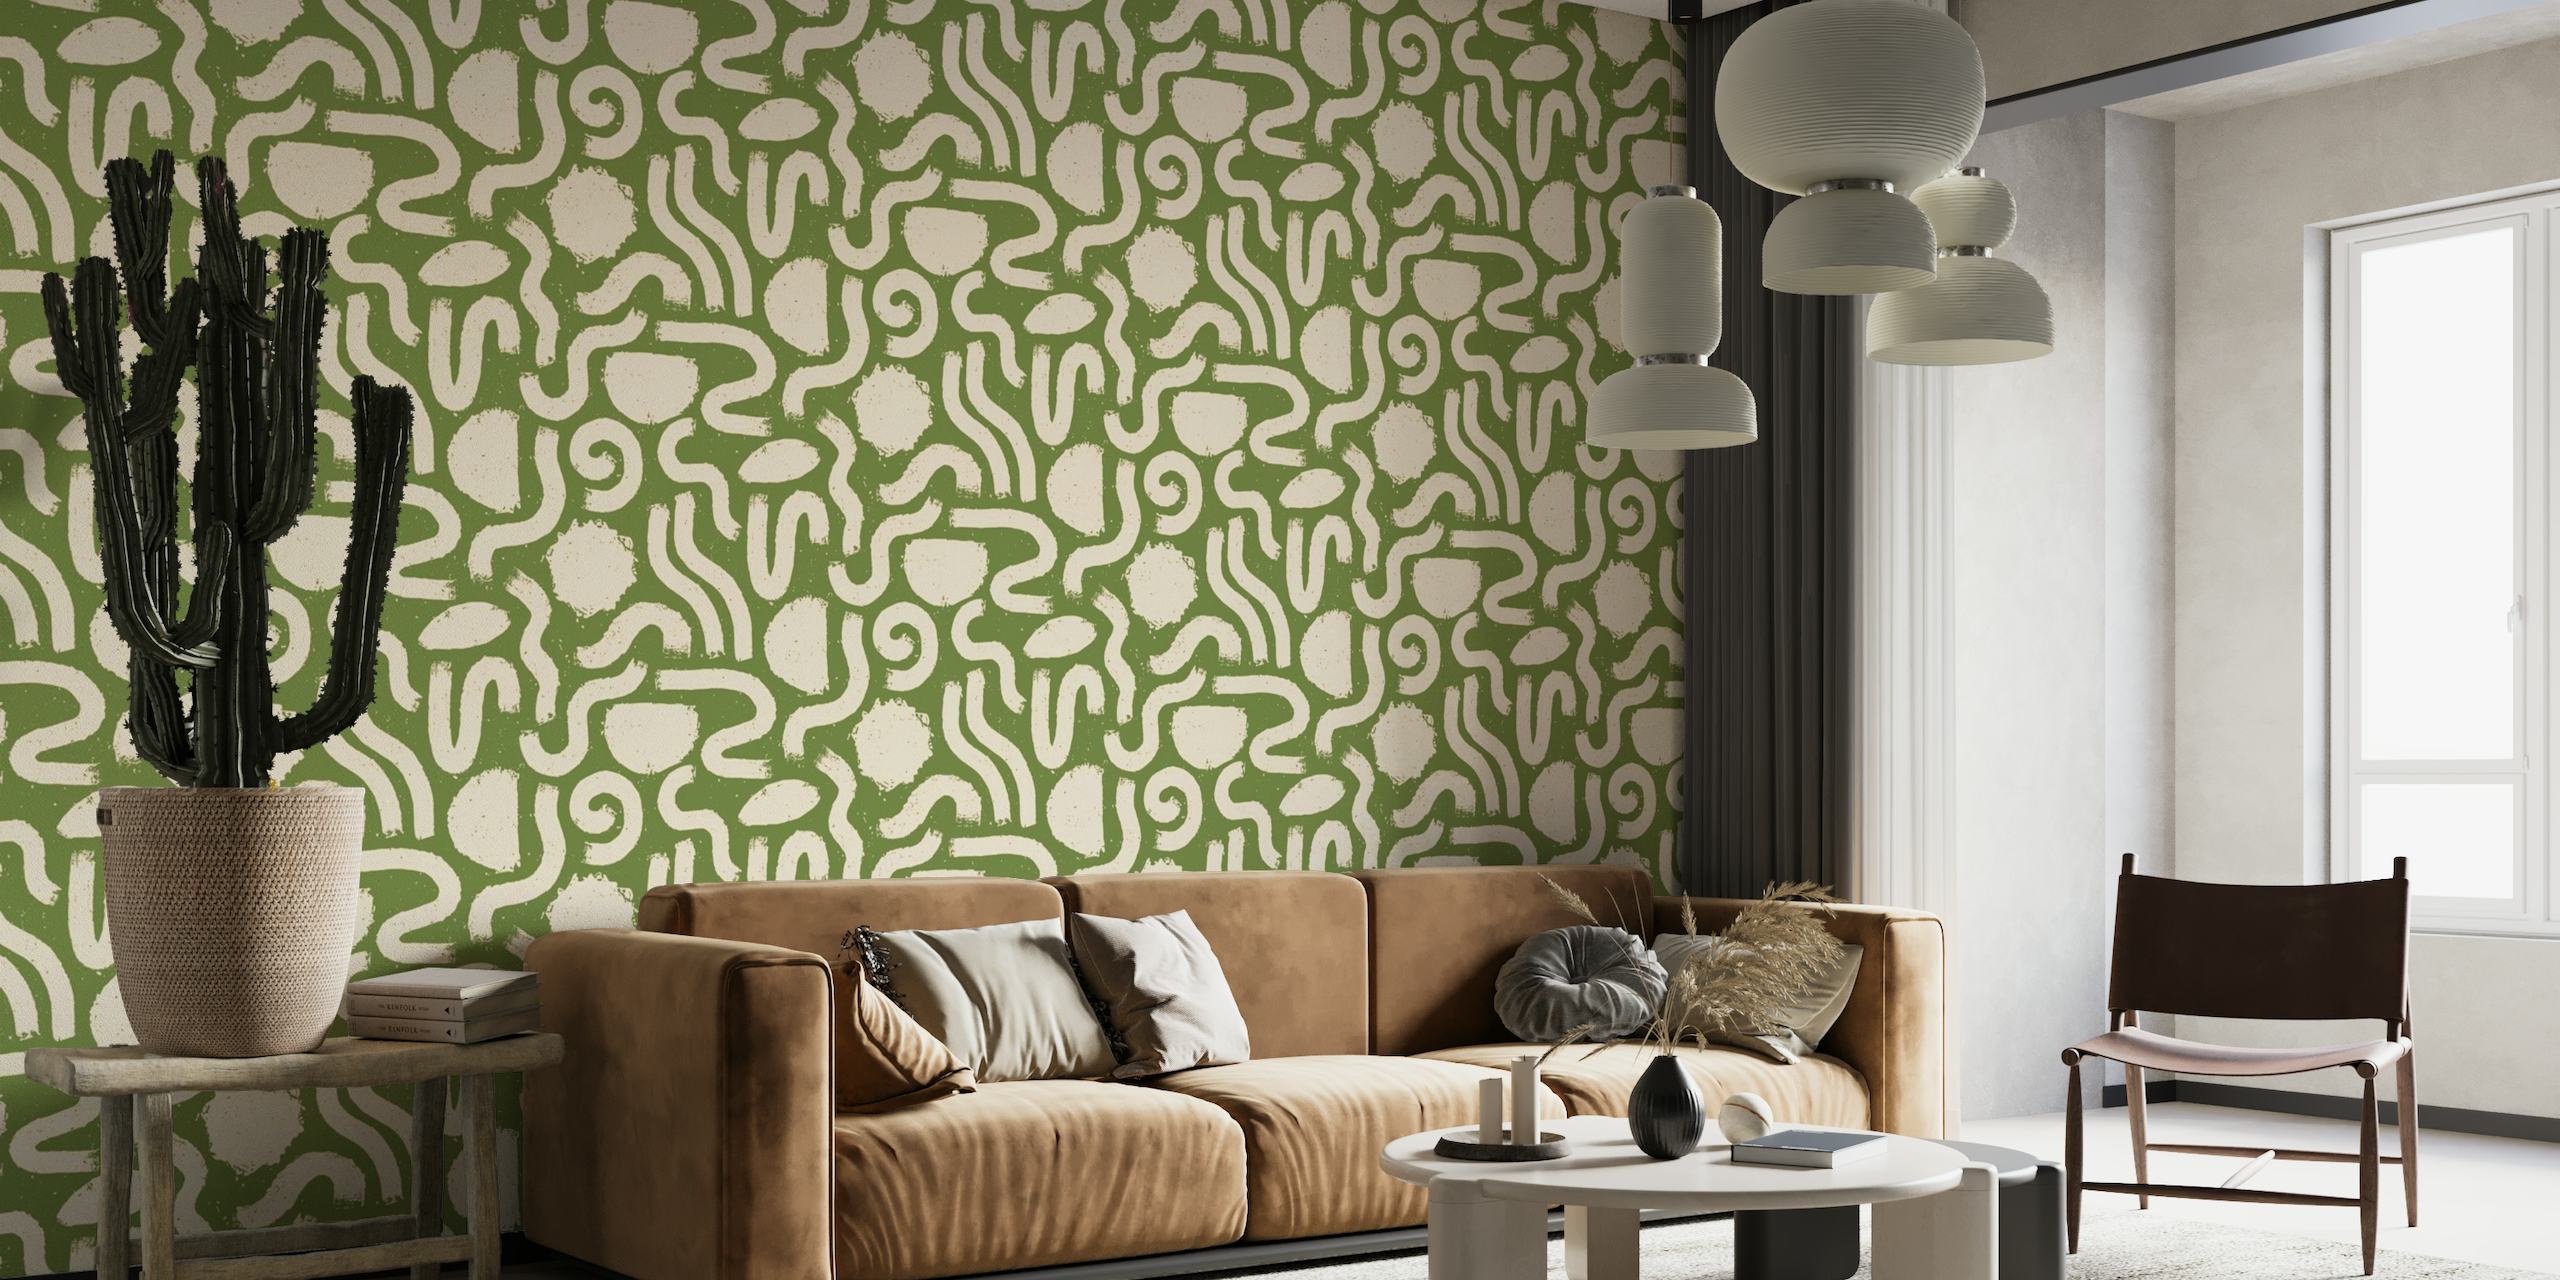 Abstract green and cream painted shapes pattern wall mural